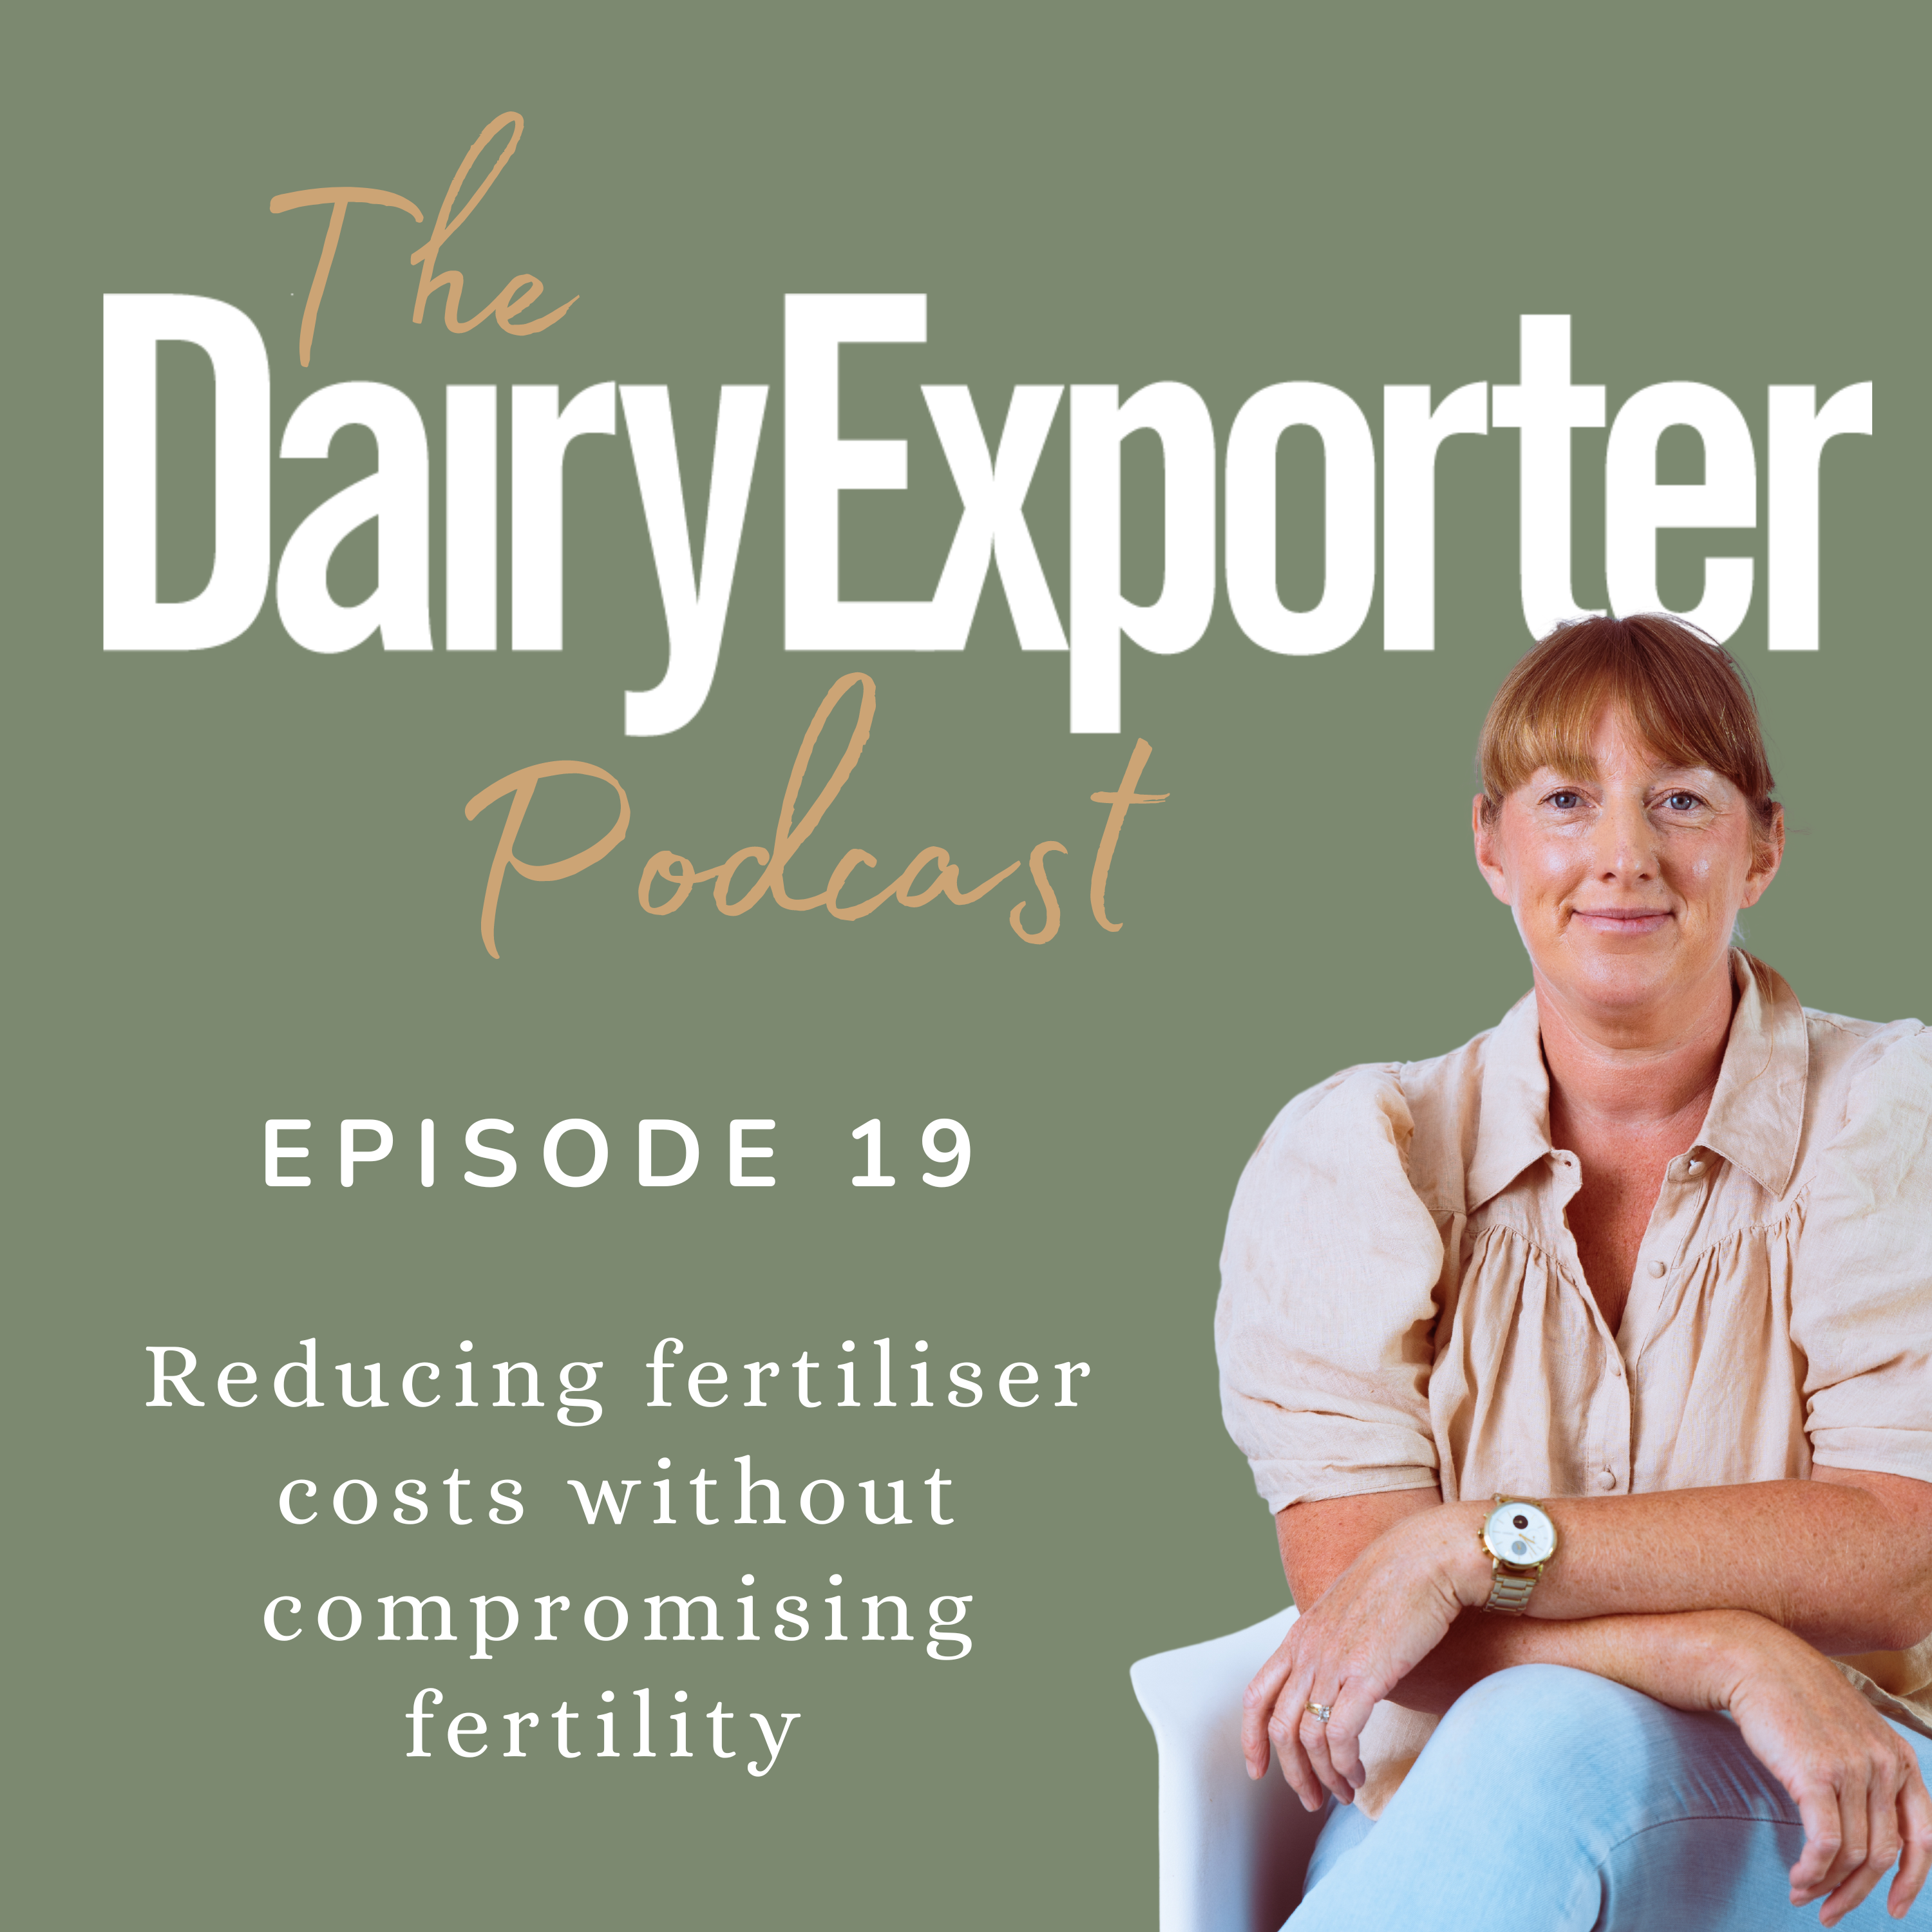 Episode 19 - Reducing fertiliser costs without compromising fertility